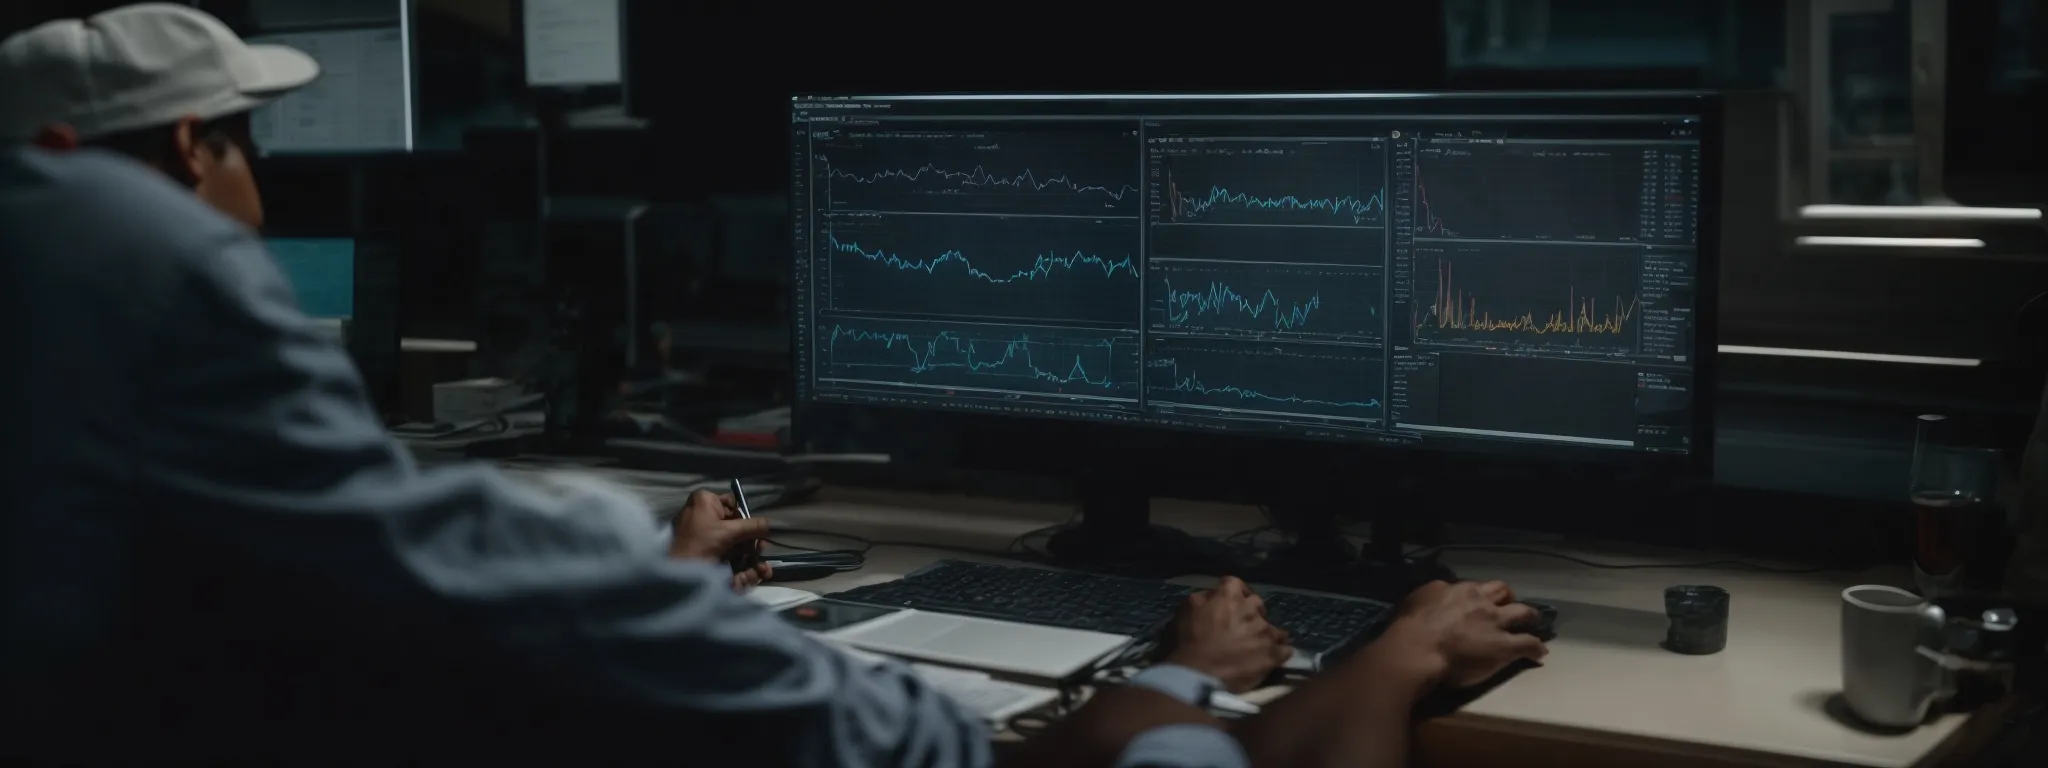 a person looking at complex graphs and charts on a computer screen to analyze website performance metrics.